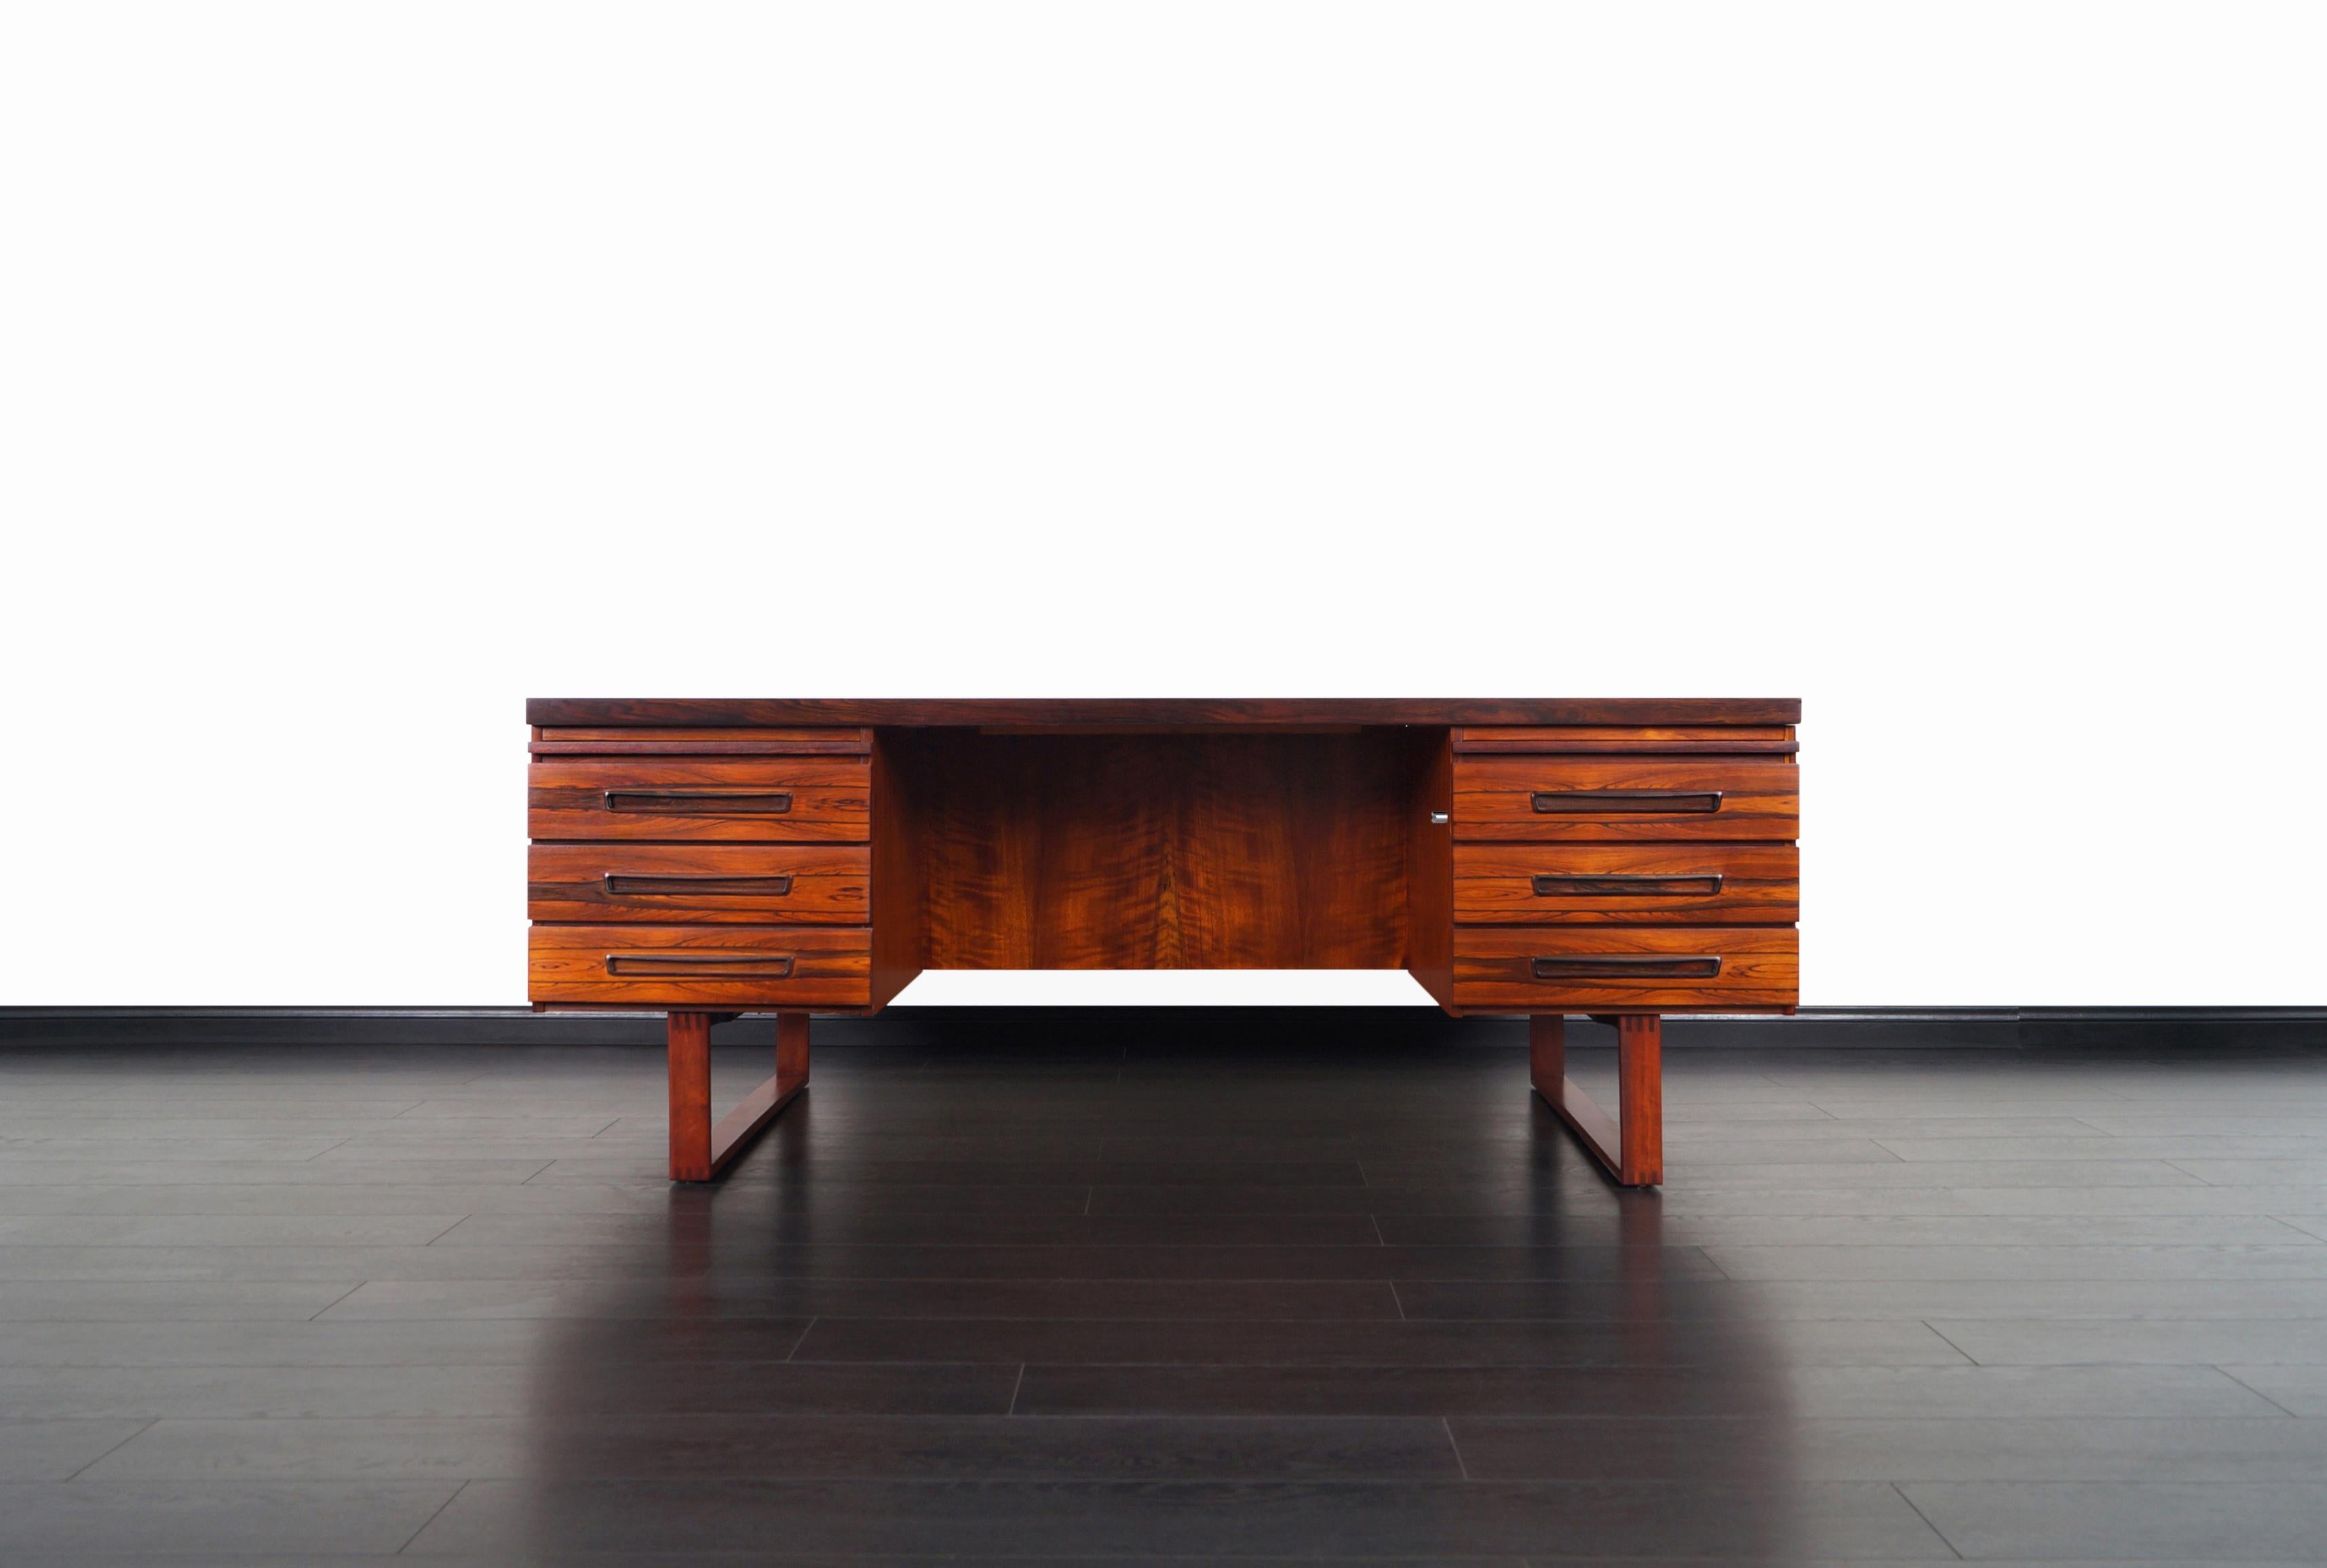 Danish modern executive rosewood desk designed by Henning Jensen and Torbin Valeur for Dyrlund in Denmark, circa 1960s. This desk features a stunning Brazilian rosewood case that sits over a pair of sleigh legs, with six dovetailed drawers and two